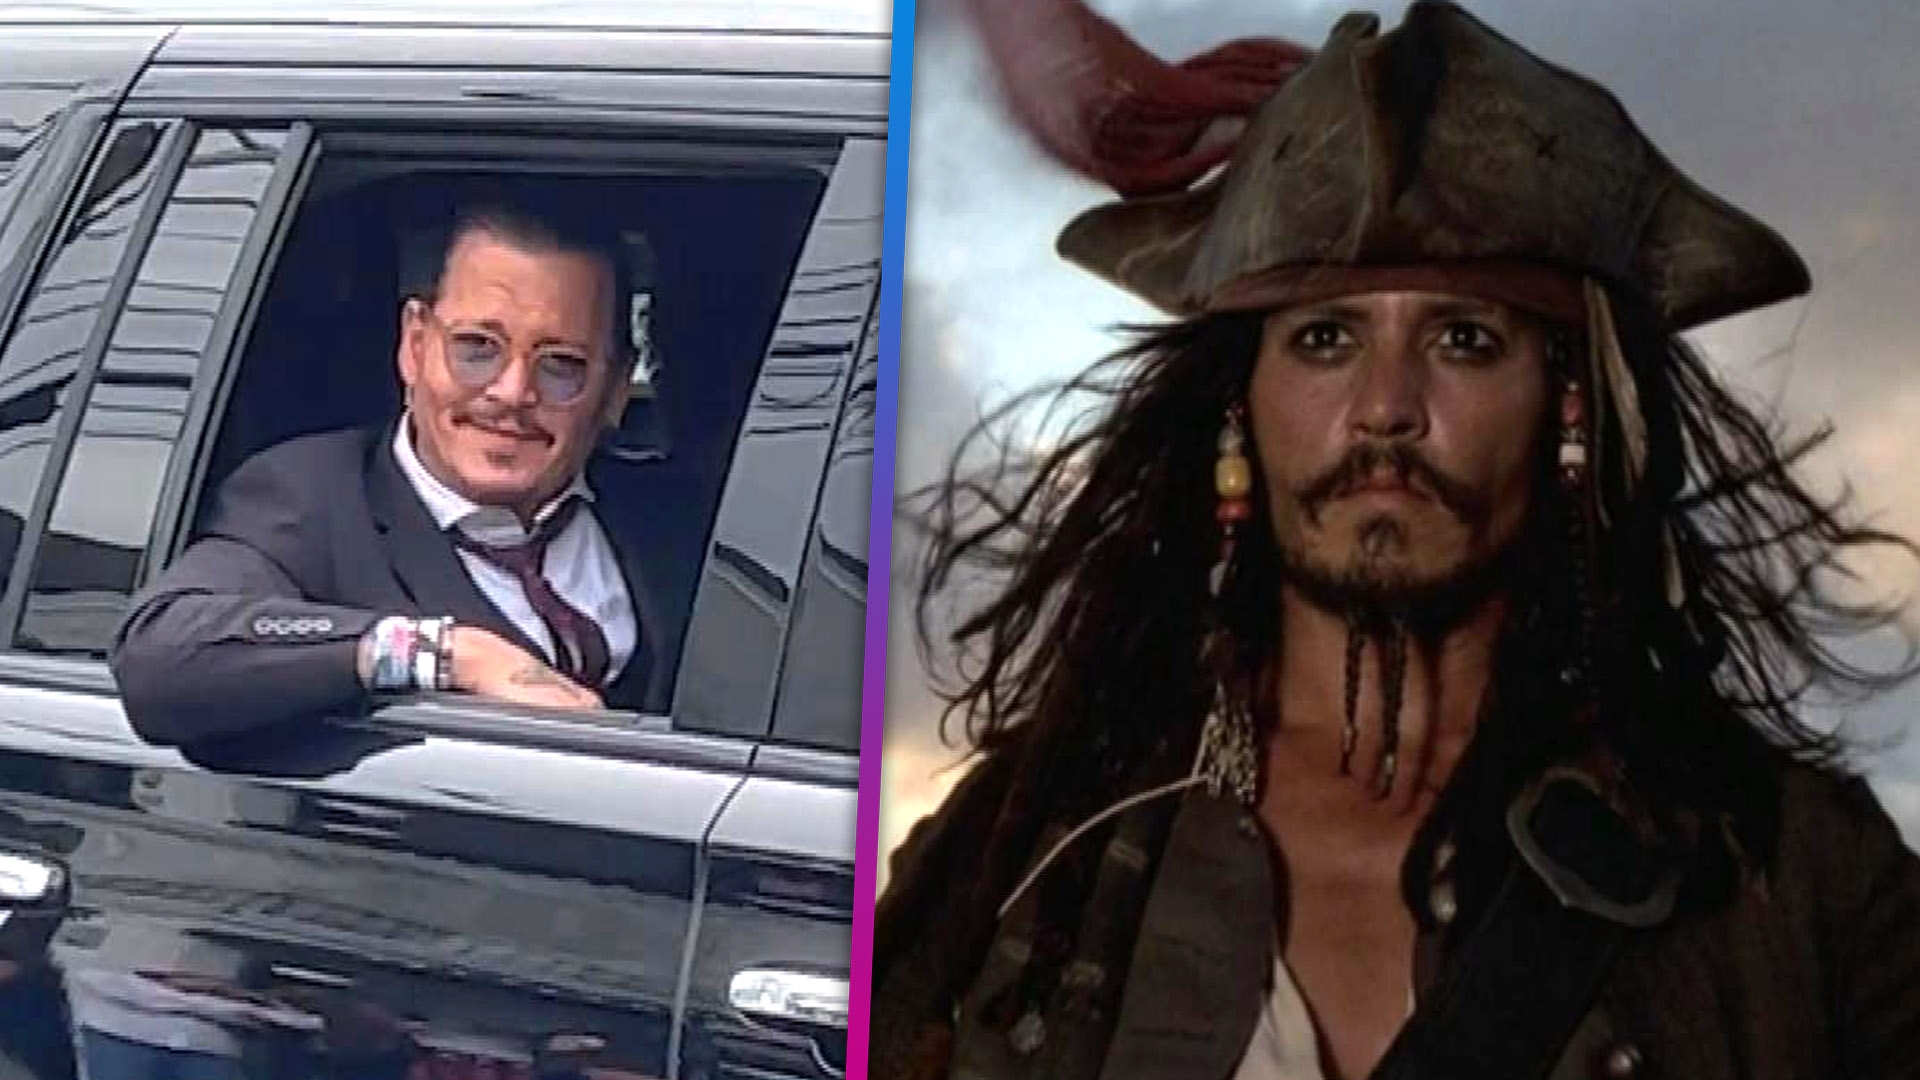 Johnny Depp Says He'll Never Do Another 'Pirates of the Caribbean